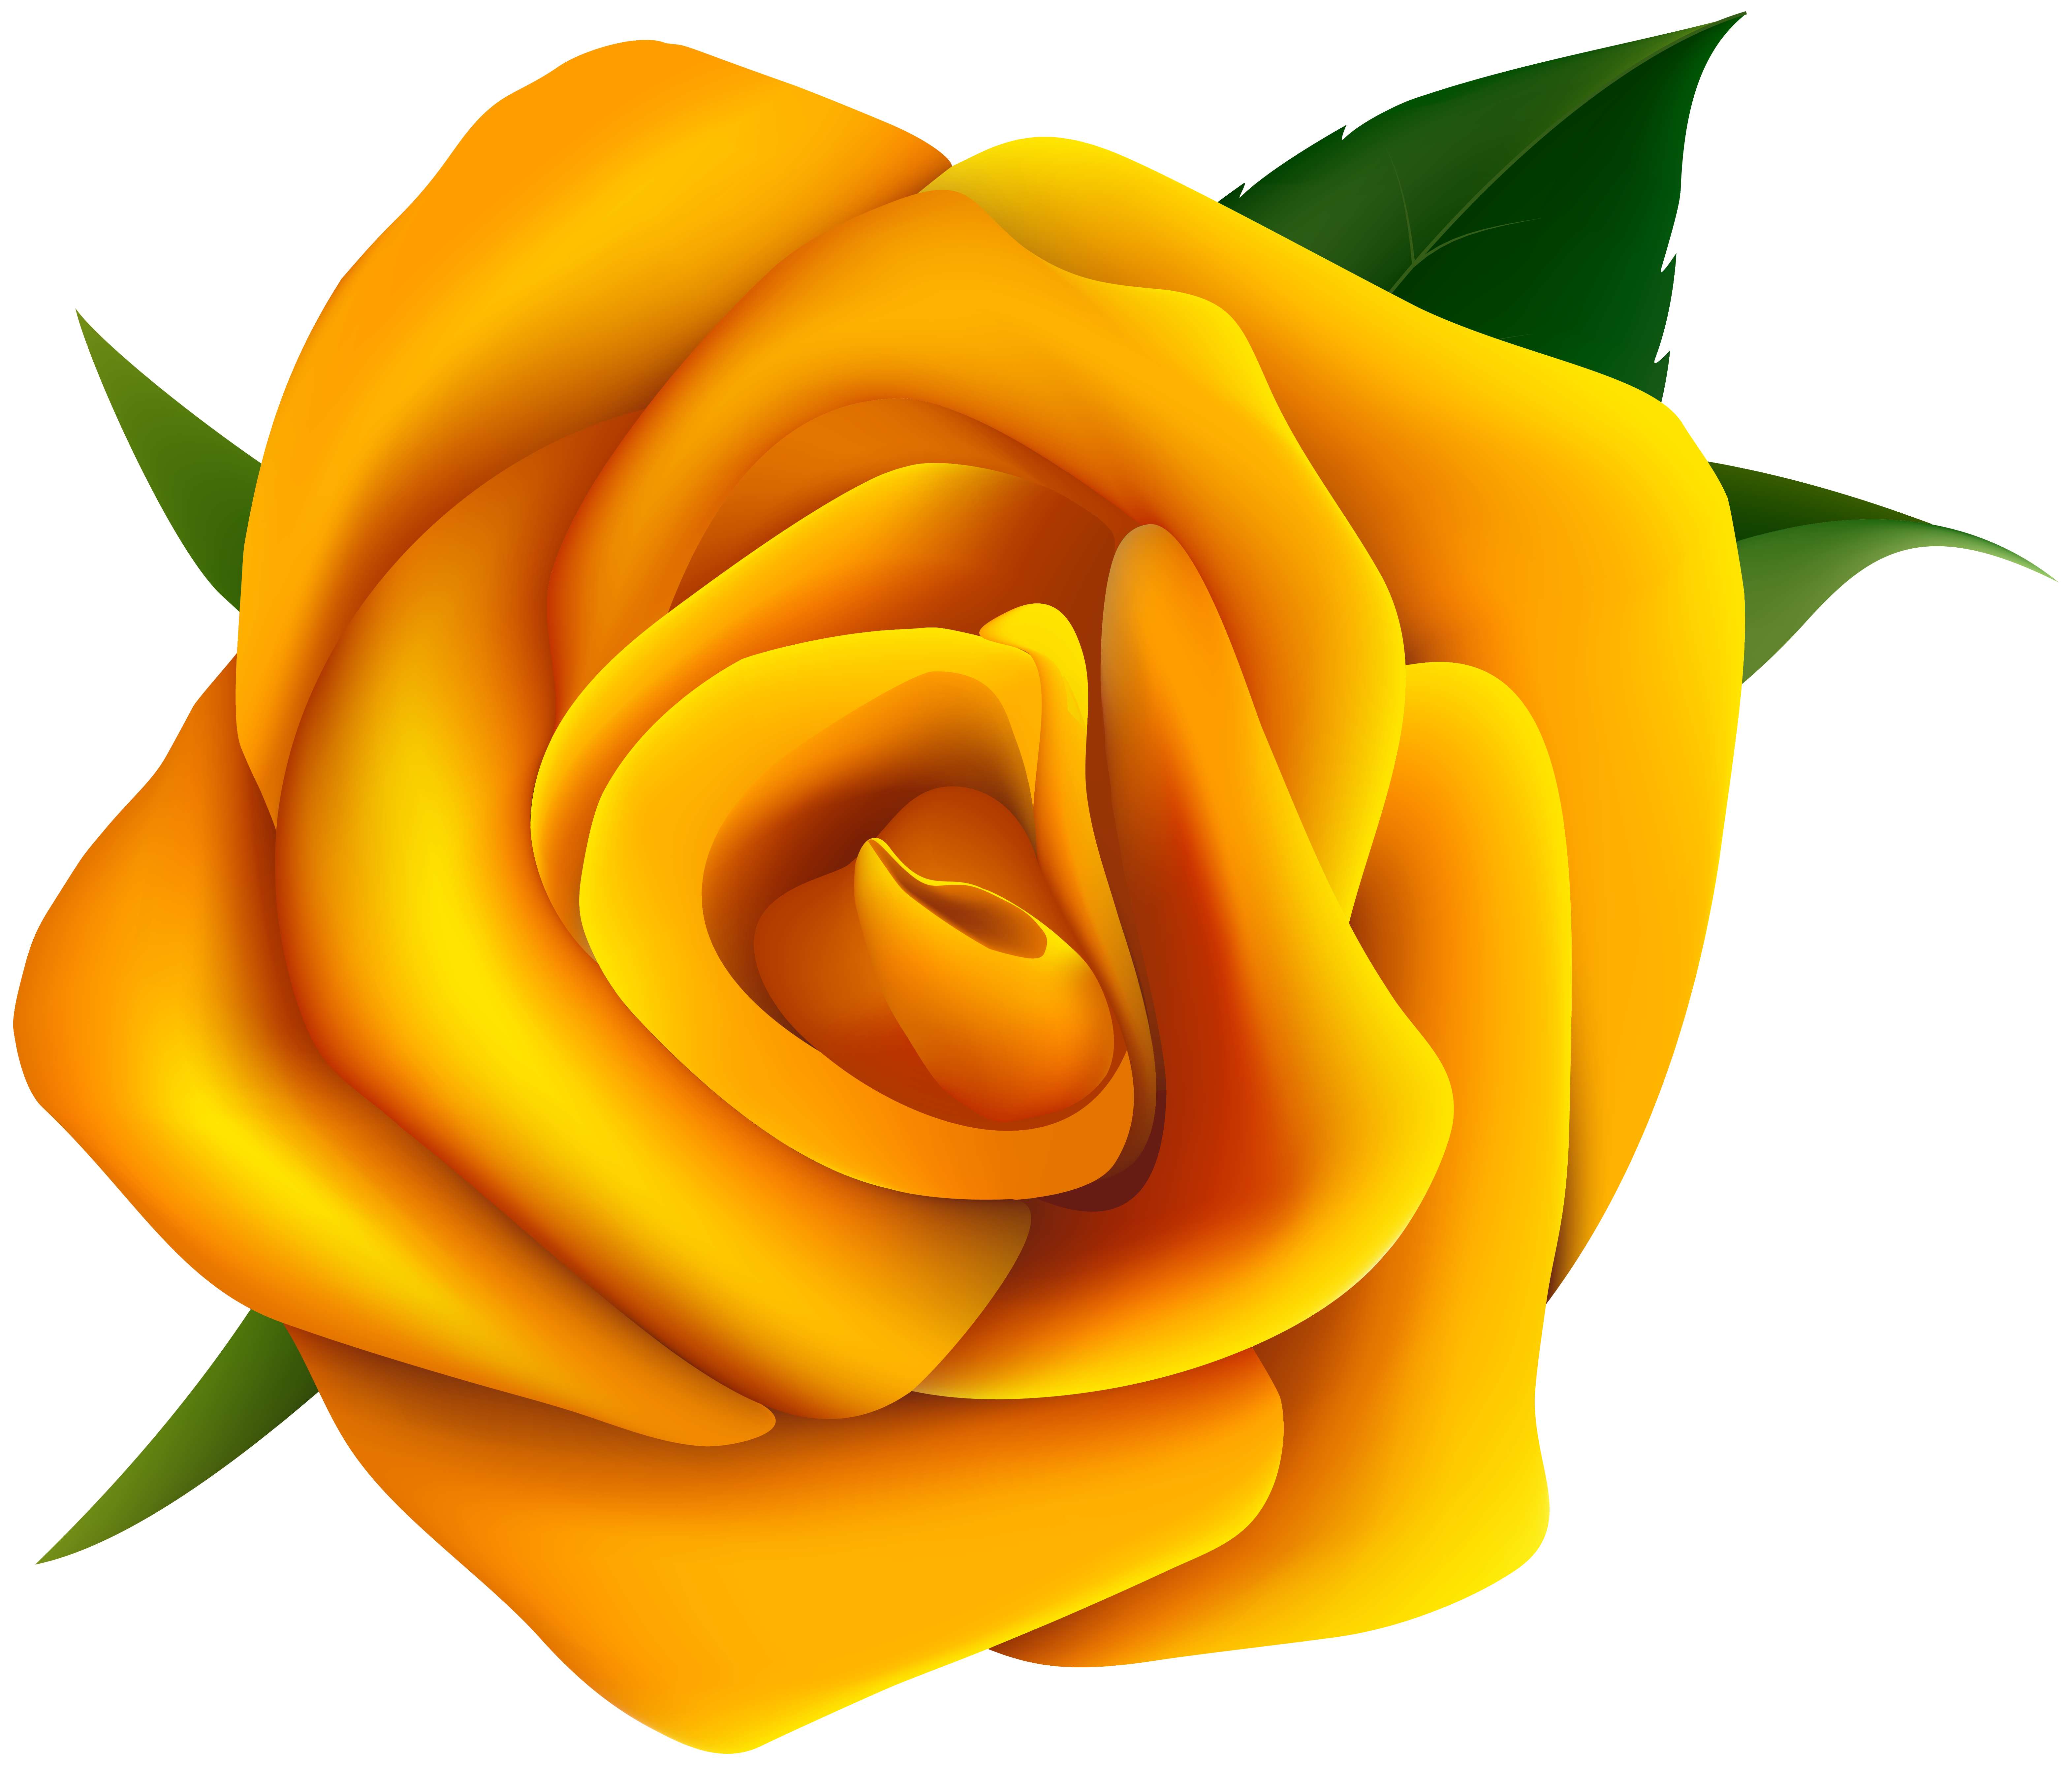 Rose clipart image gallery. Yellow flower png